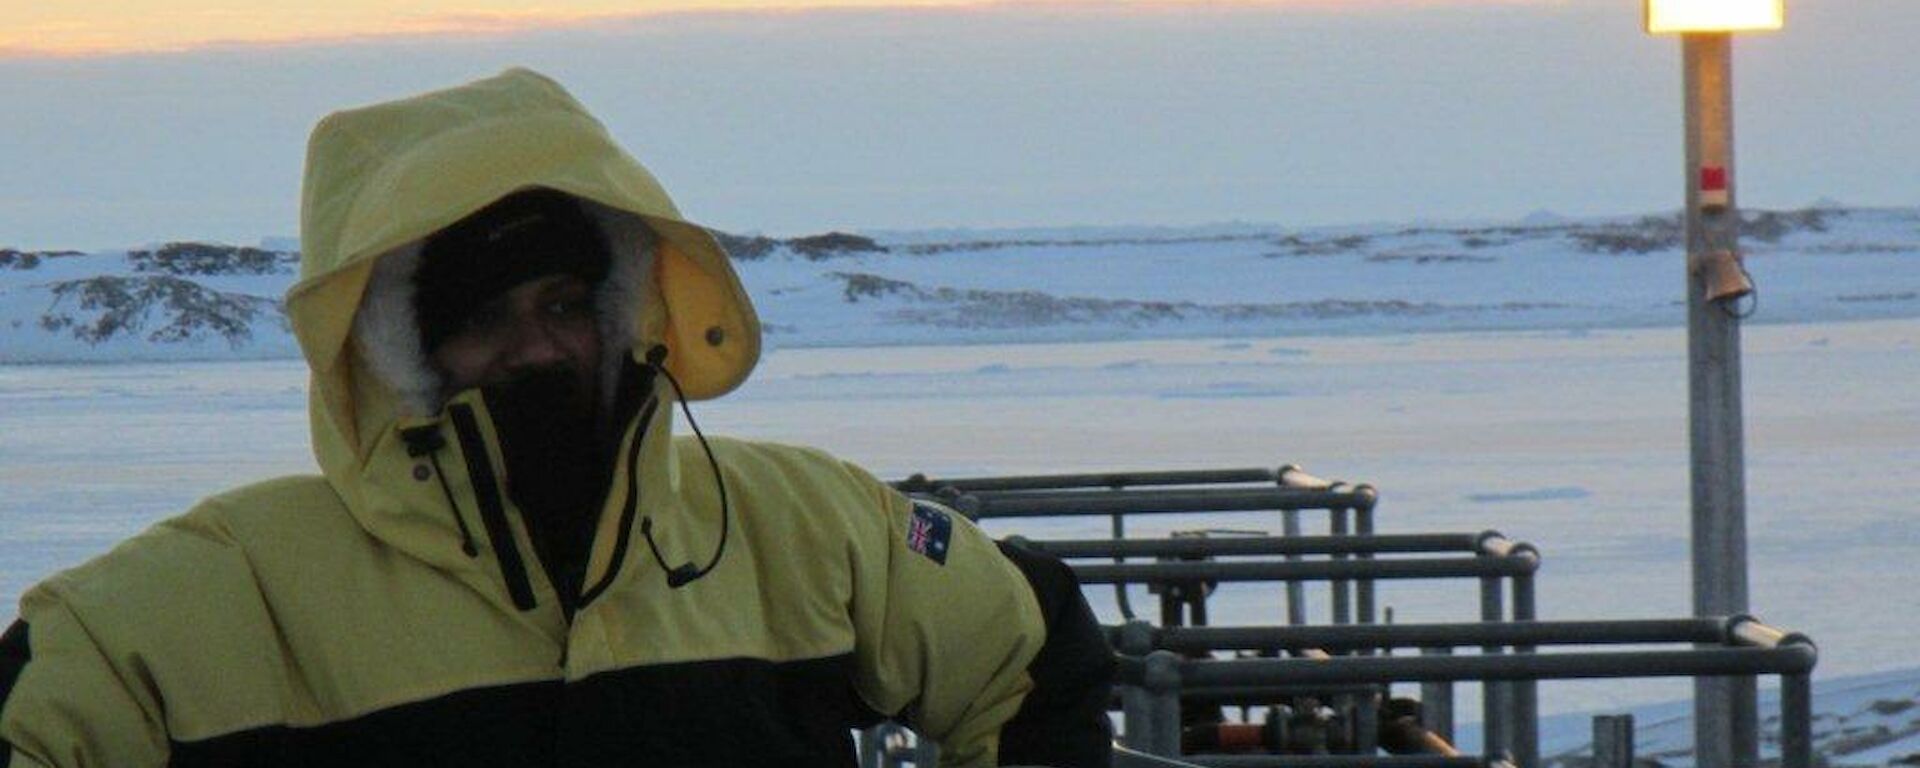 Abrar posing in the upper fuel farm over looking the frozen sea ice in the background